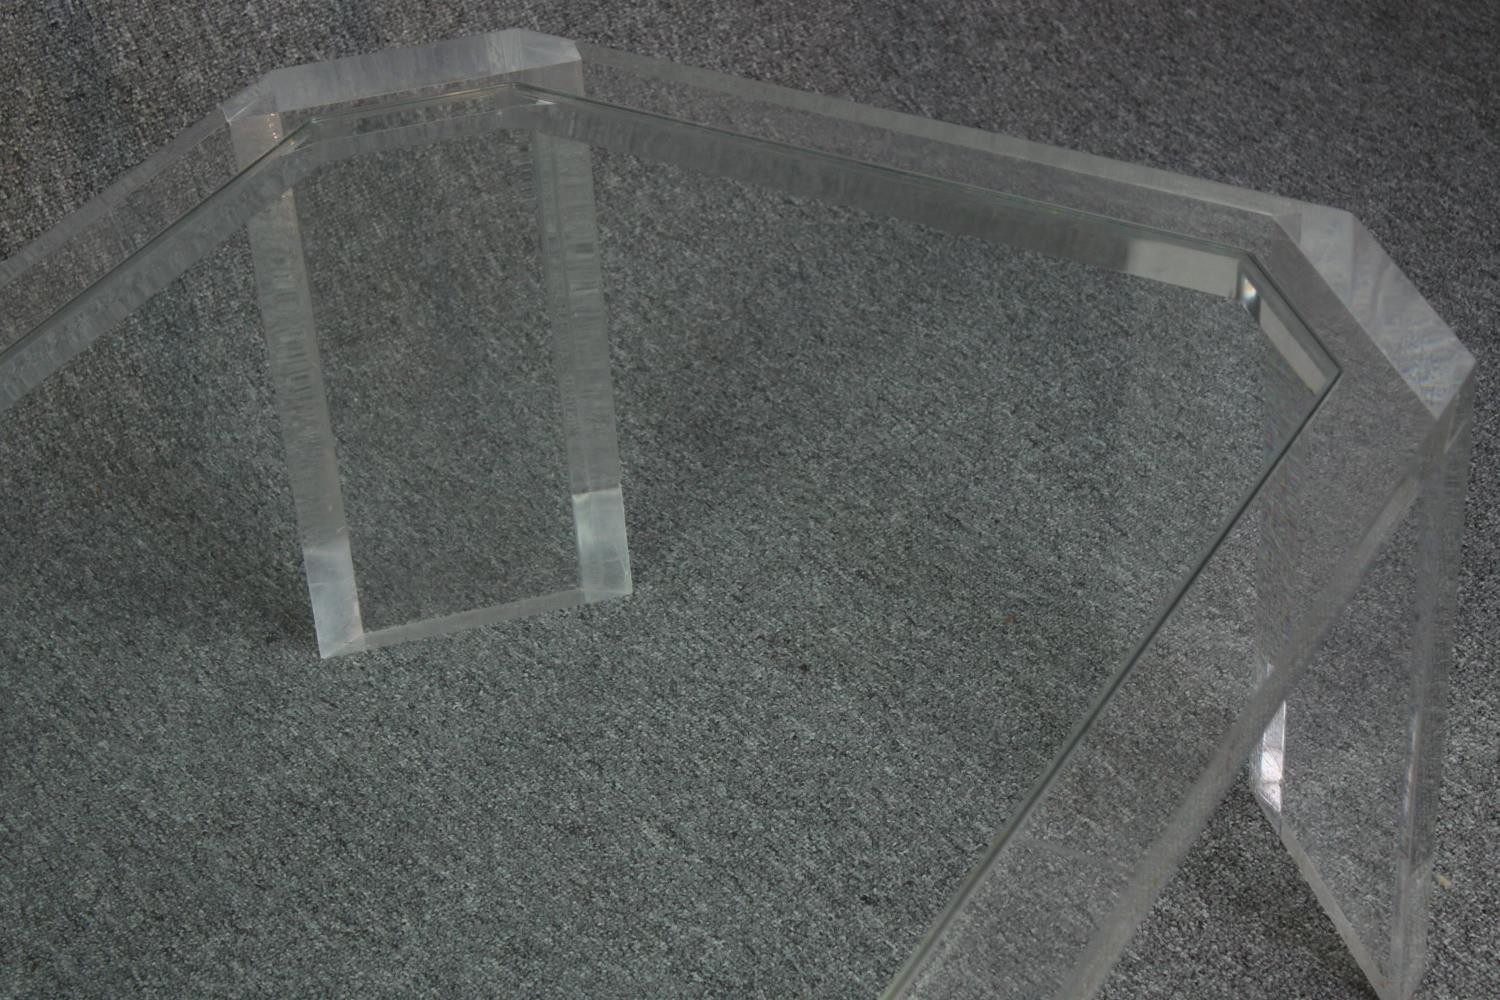 Coffee table, David Lange, vintage in lucite and glass. H.40 W.120 D.71cm. - Image 5 of 5